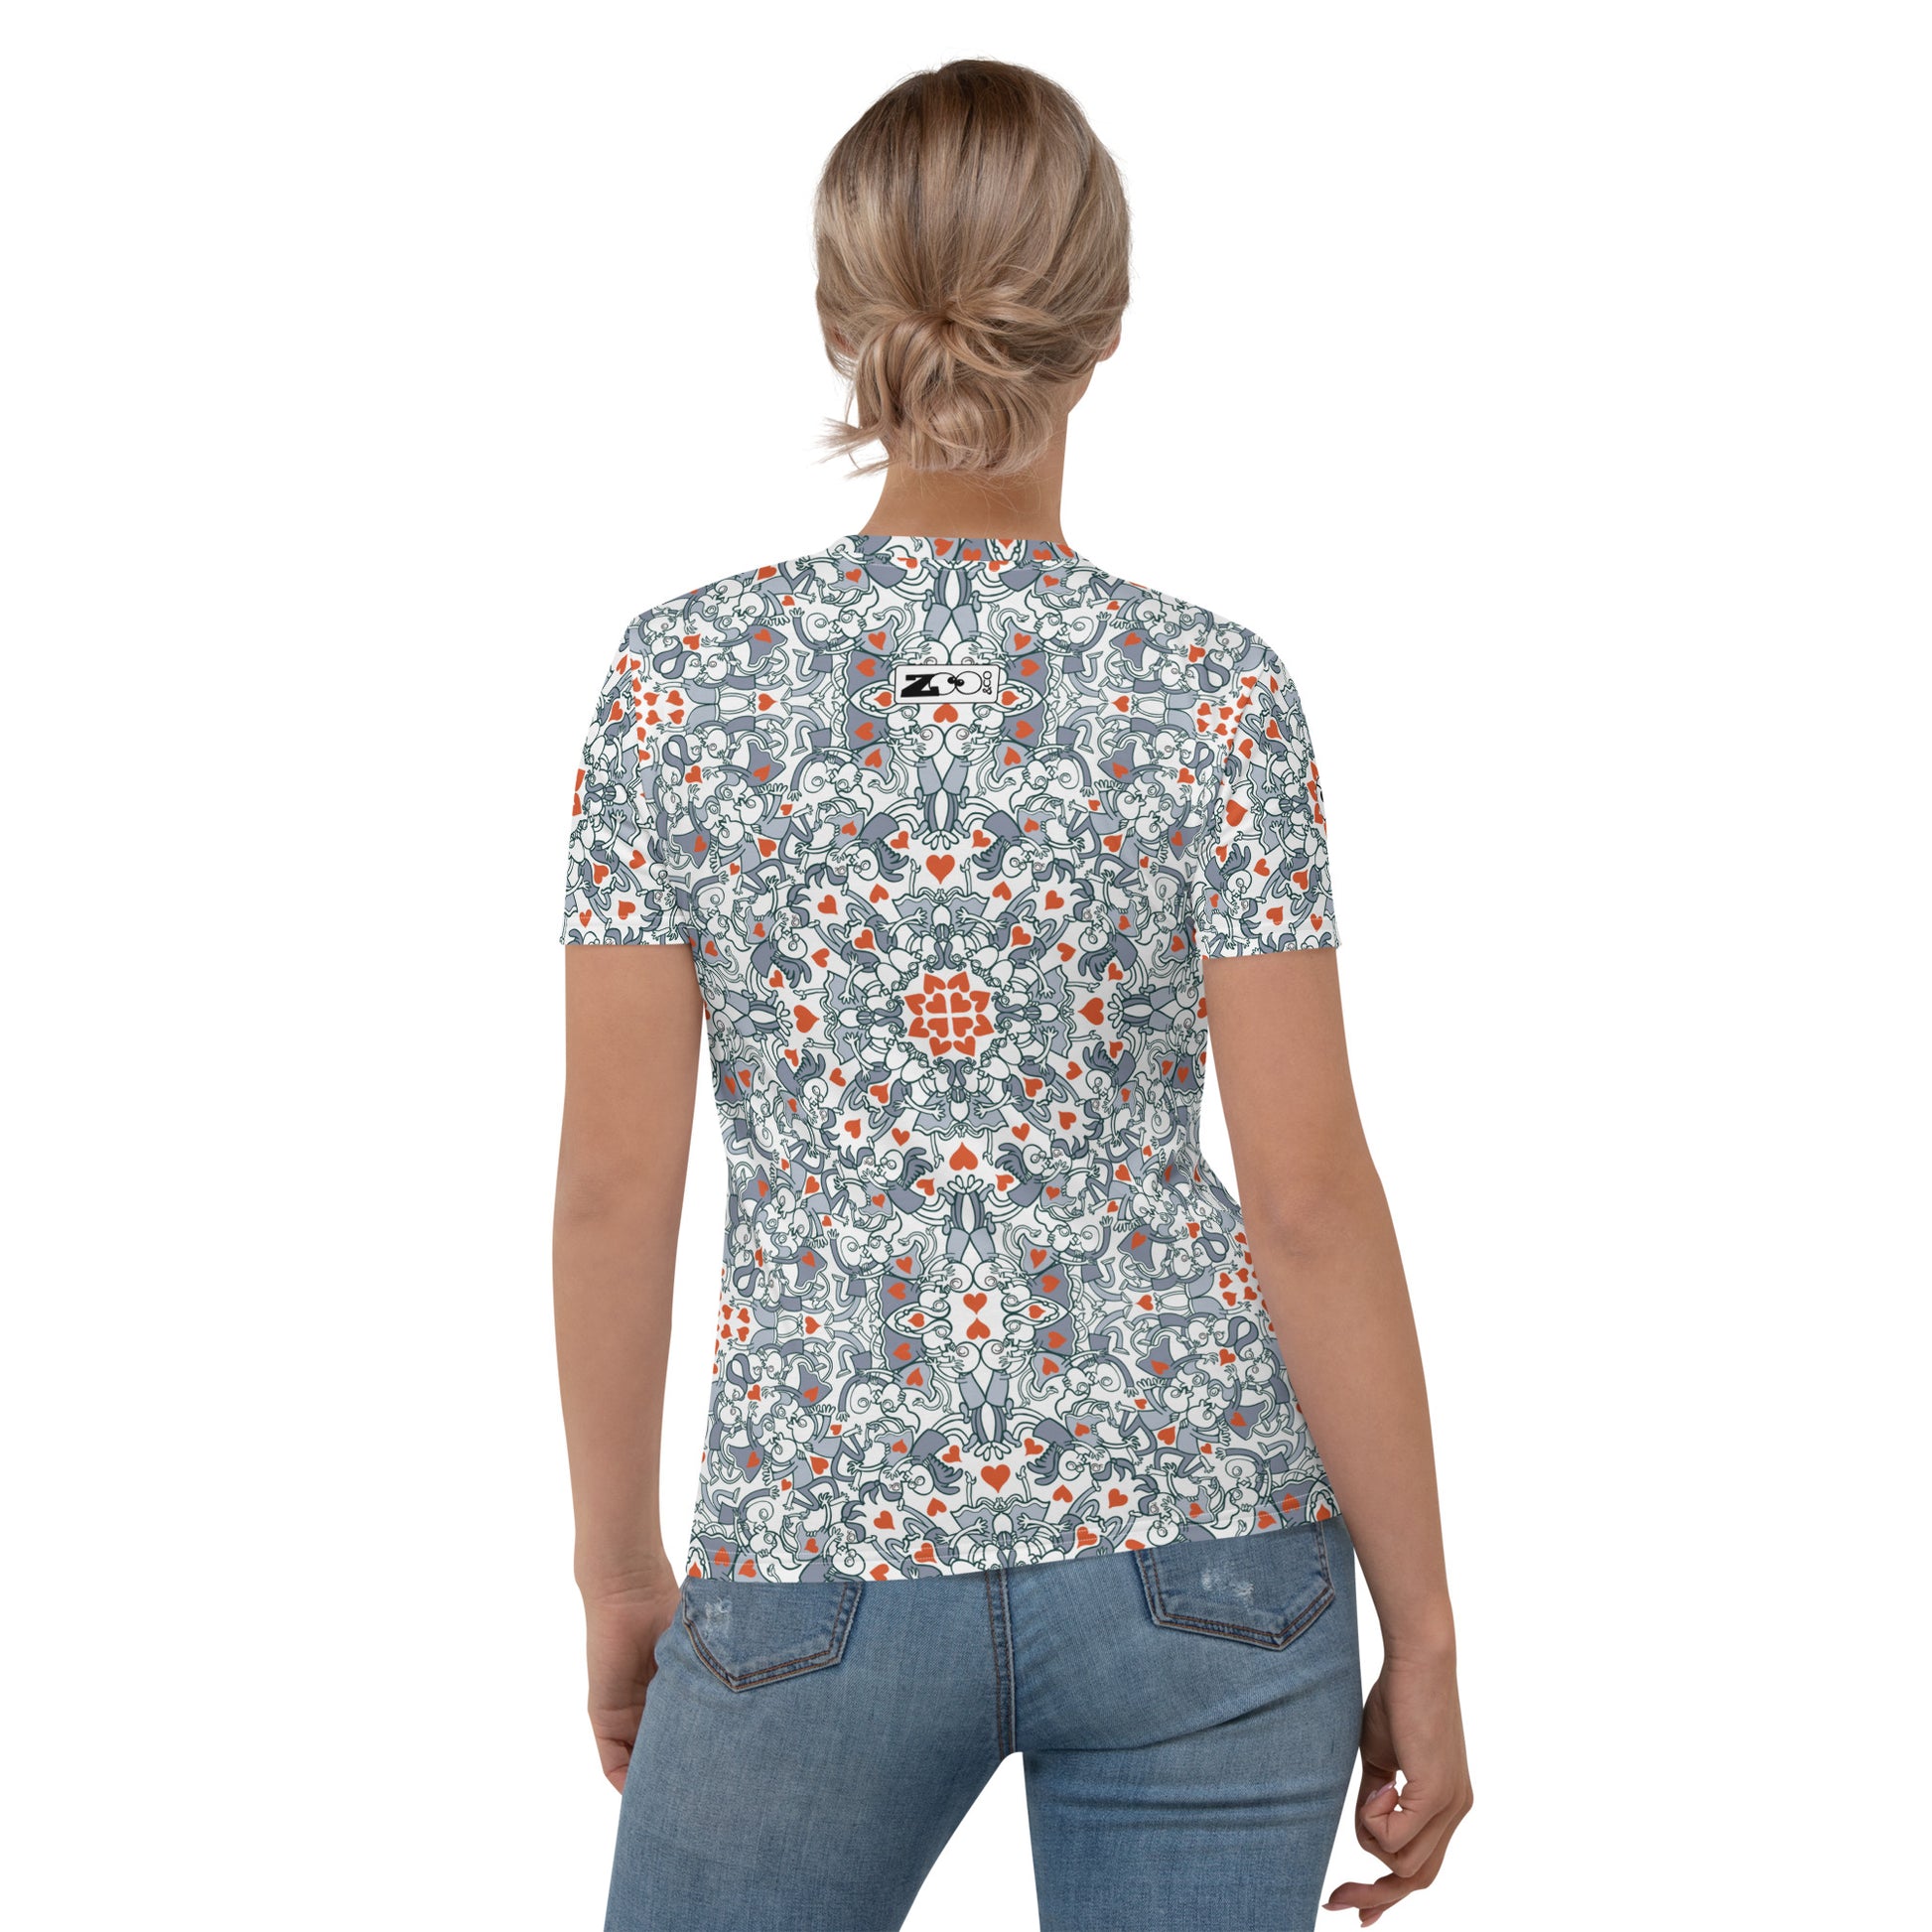 Kissed by Doodles in Valentine's Mandala Melody - Women's T-shirt. Back view